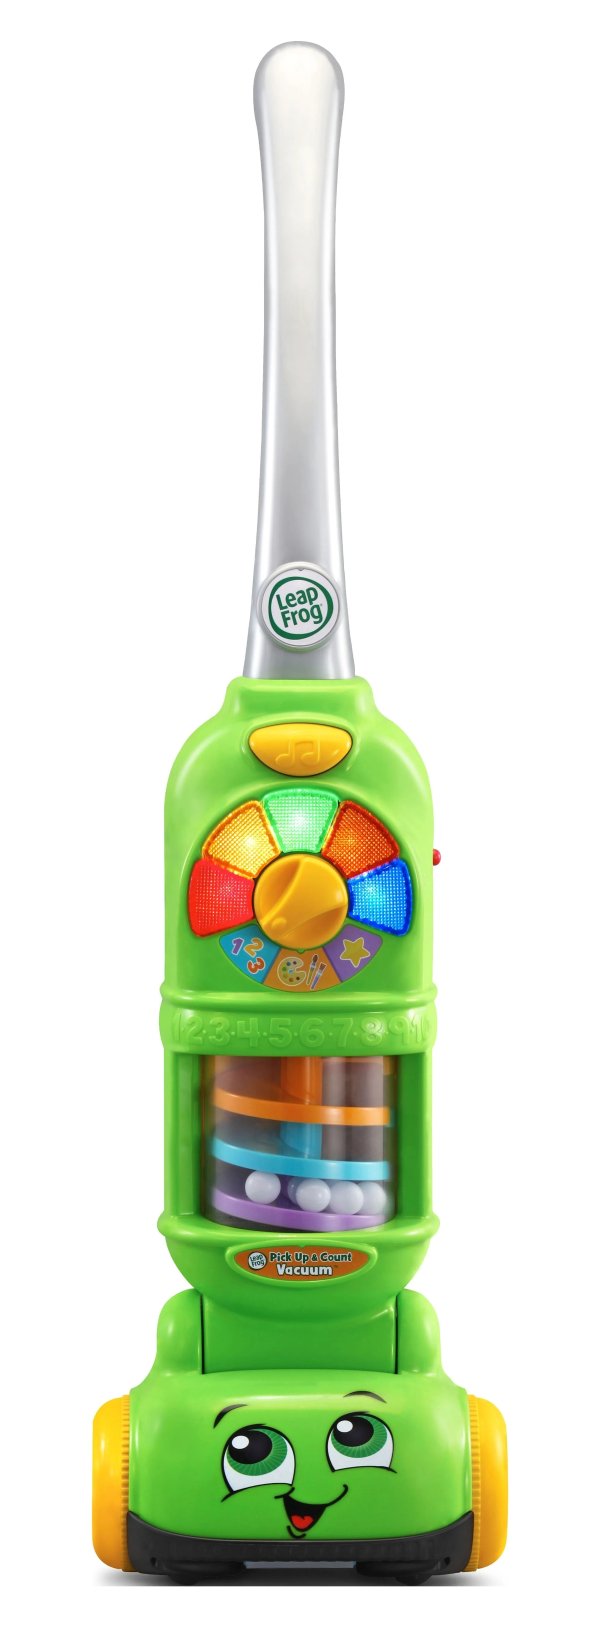 ® Pick Up & Count Vacuum™, Unisex Toy with 10 Colorful Play Pieces